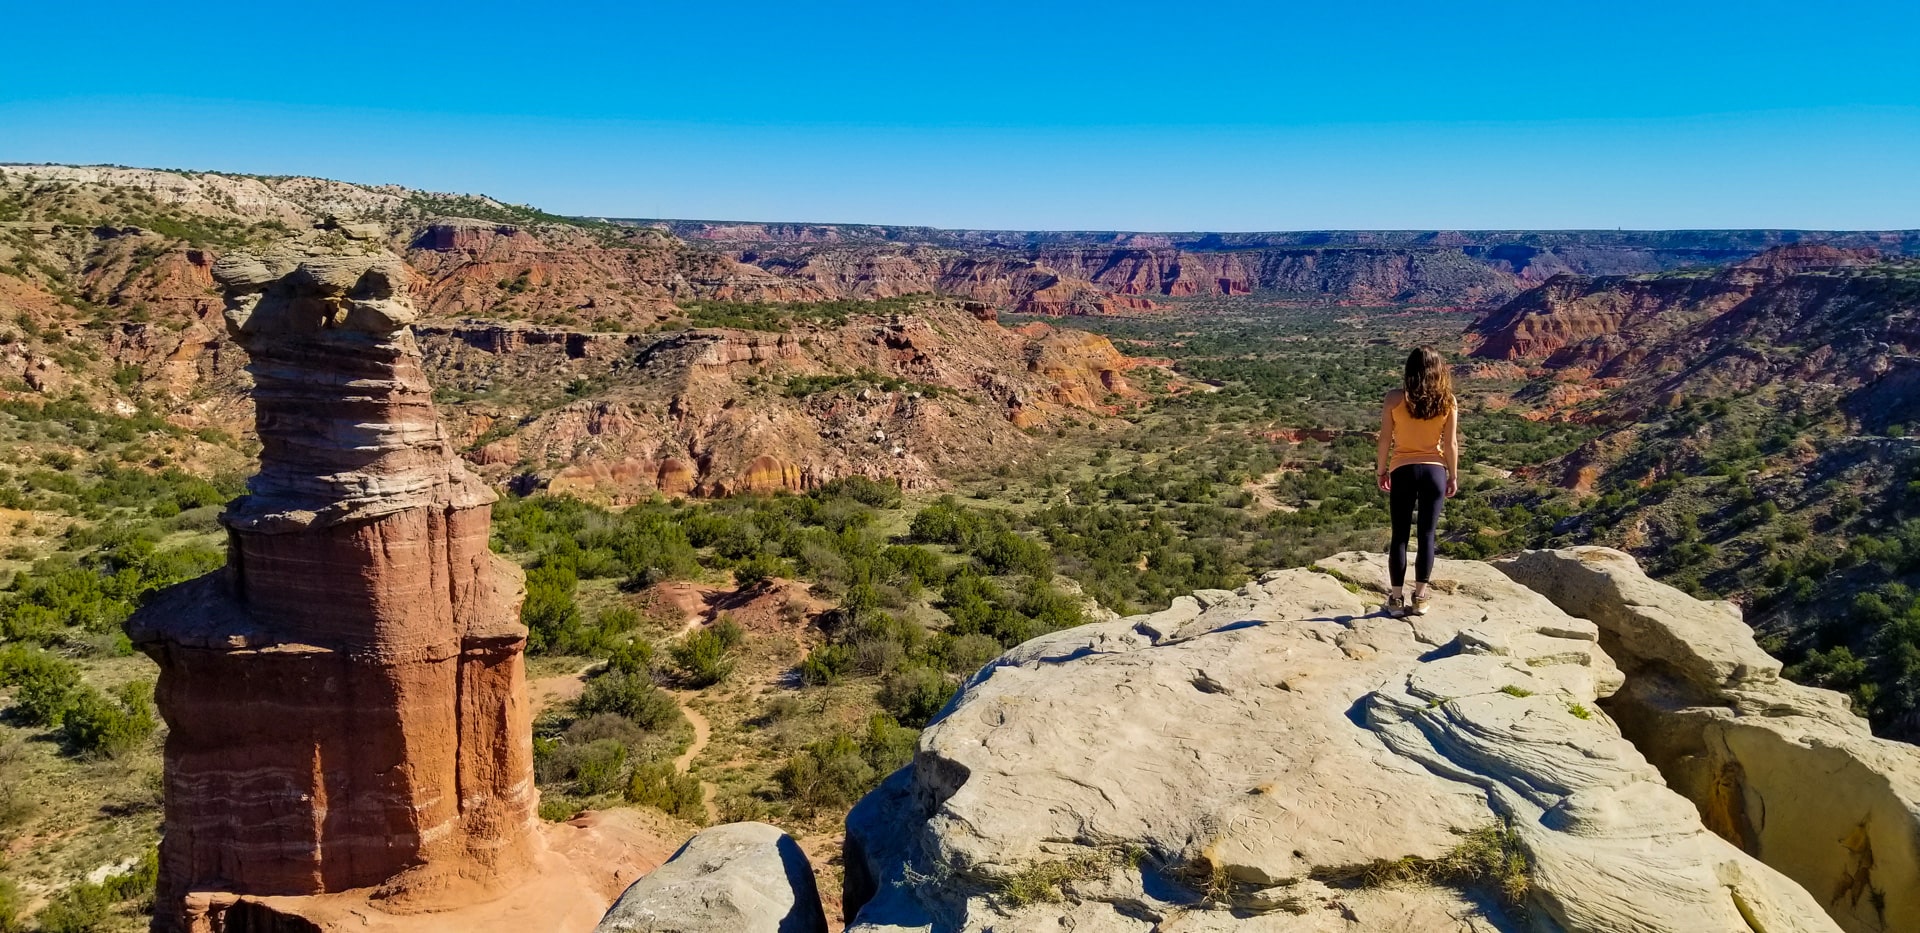 Palo Duro Canyon Caprock Canyons 2 Day Itinerary: How To Spend A